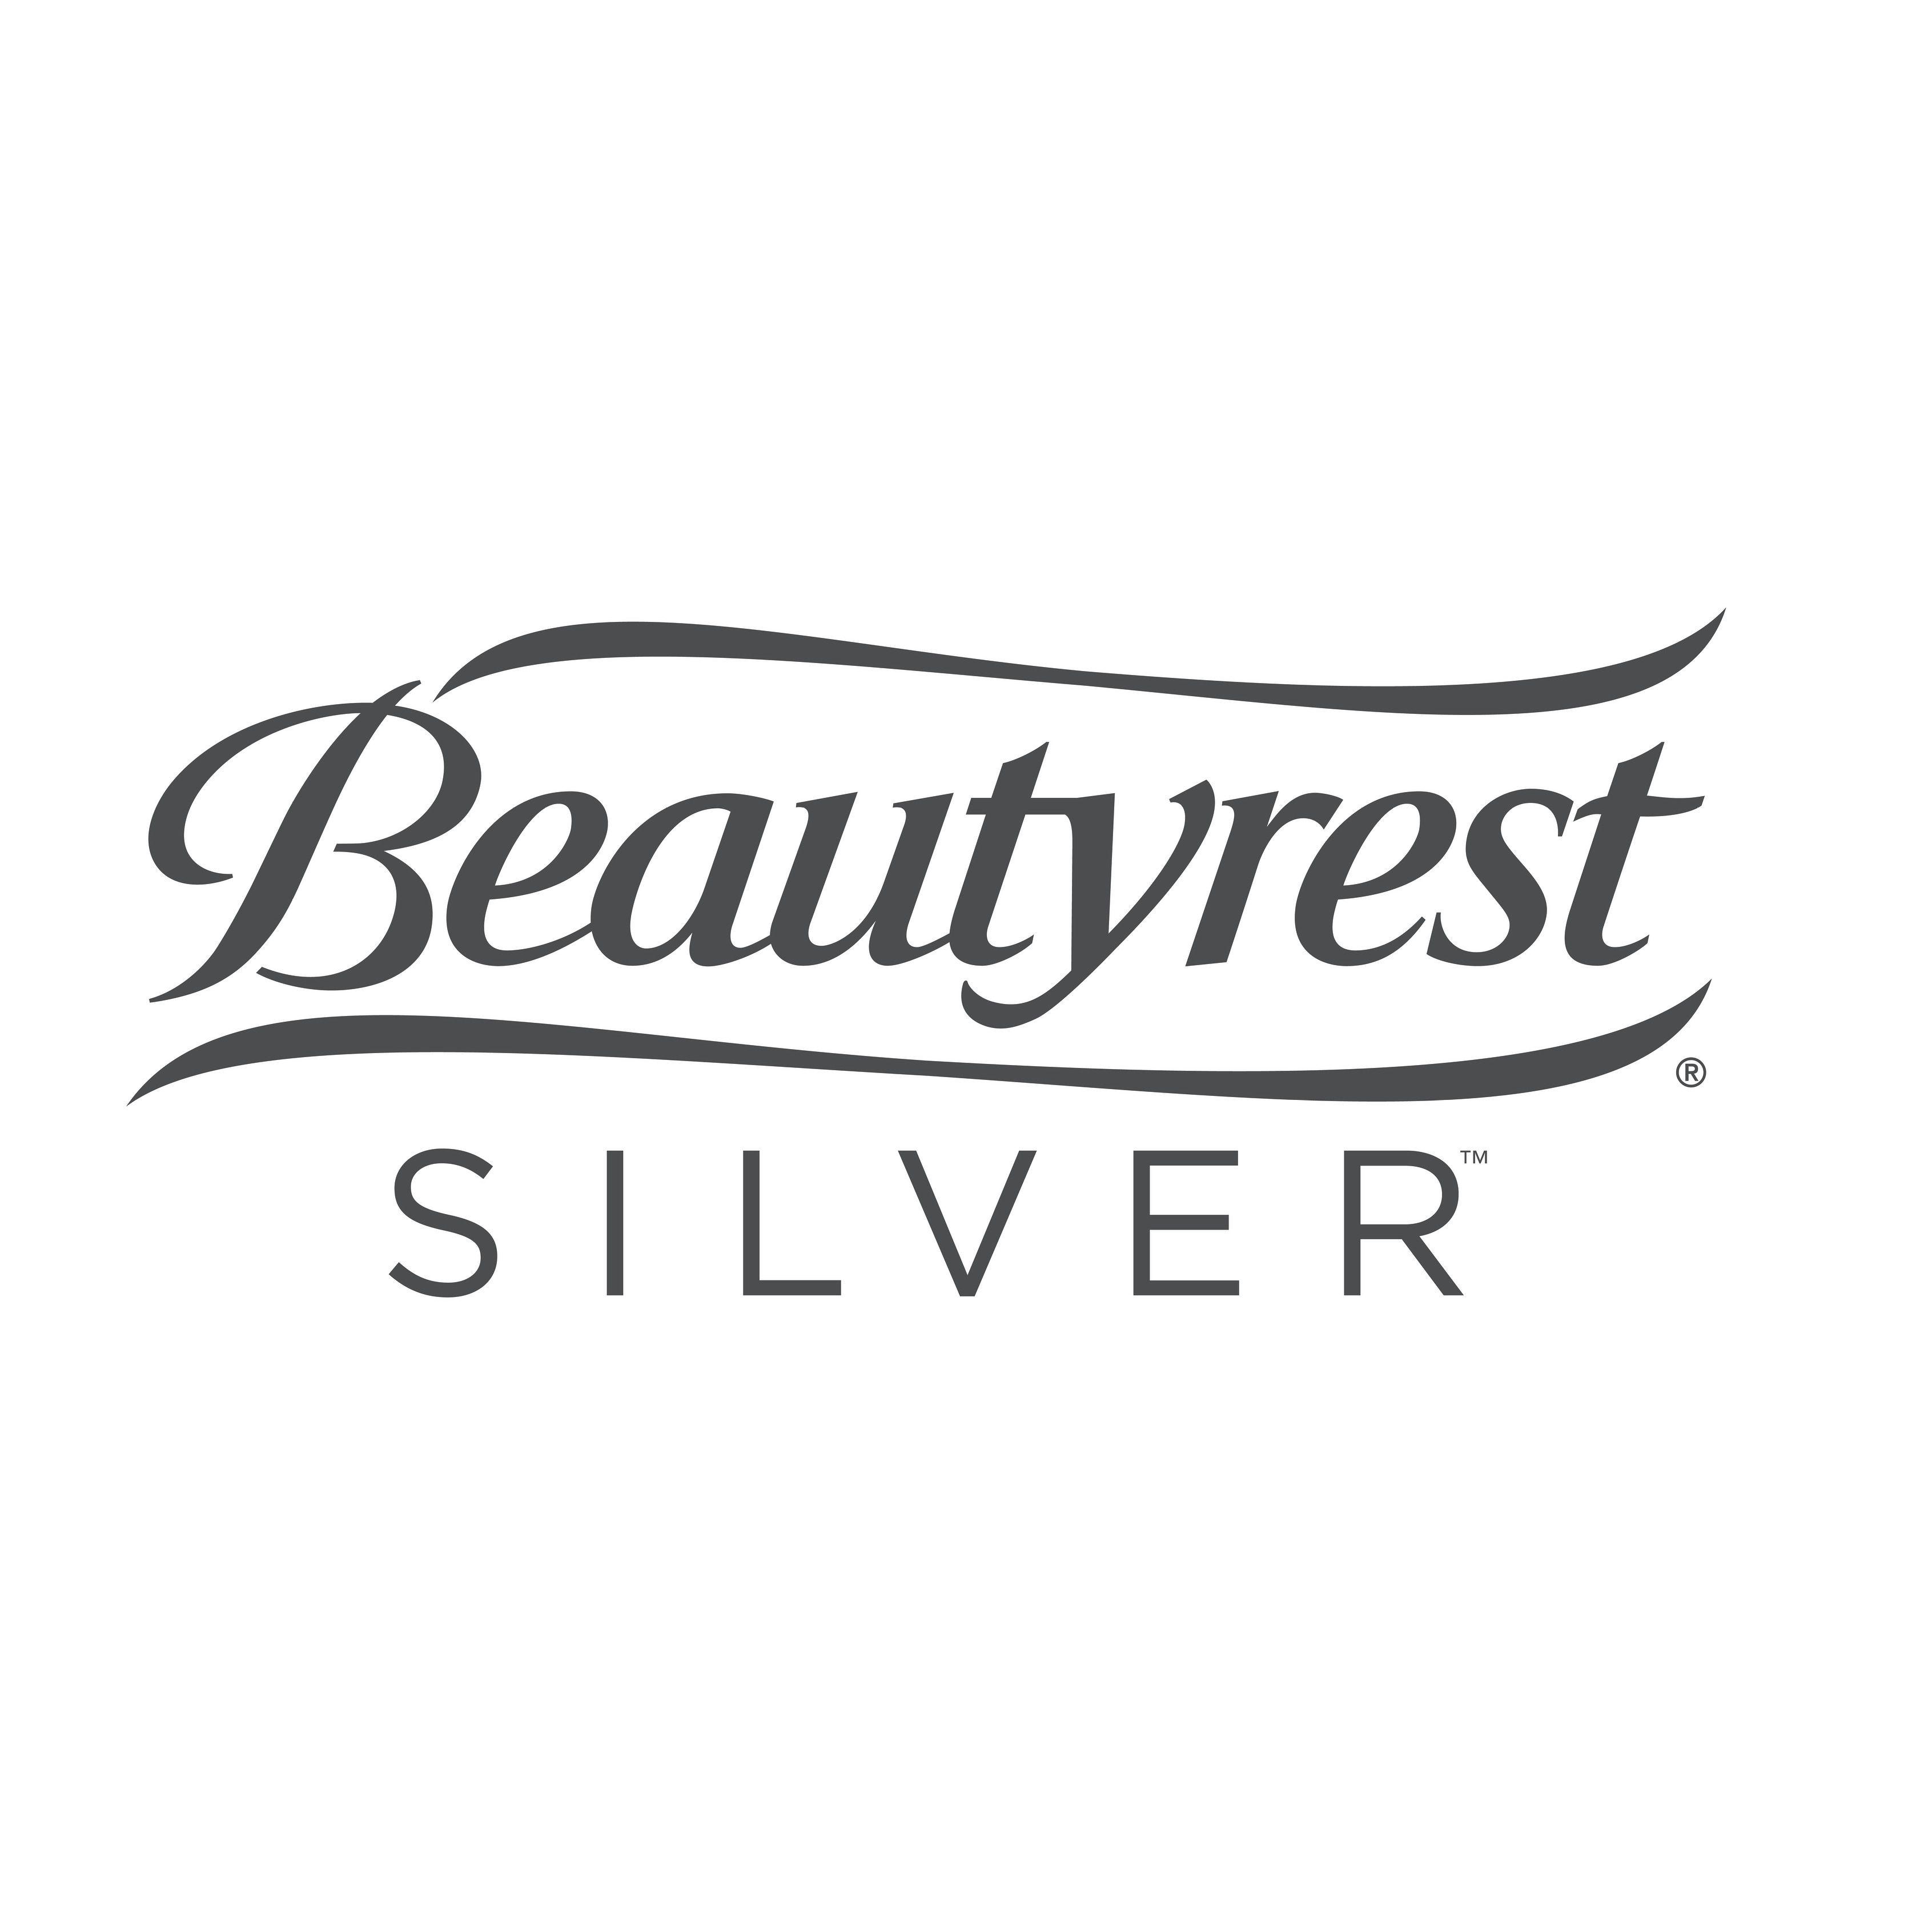 Beautyrest Logo - Beautyrest Silver 18-inch King Size Lumbar Supreme with Adjustable Tri-Zone  Lumbar Support Air Bed Mattress with Built-in Pump